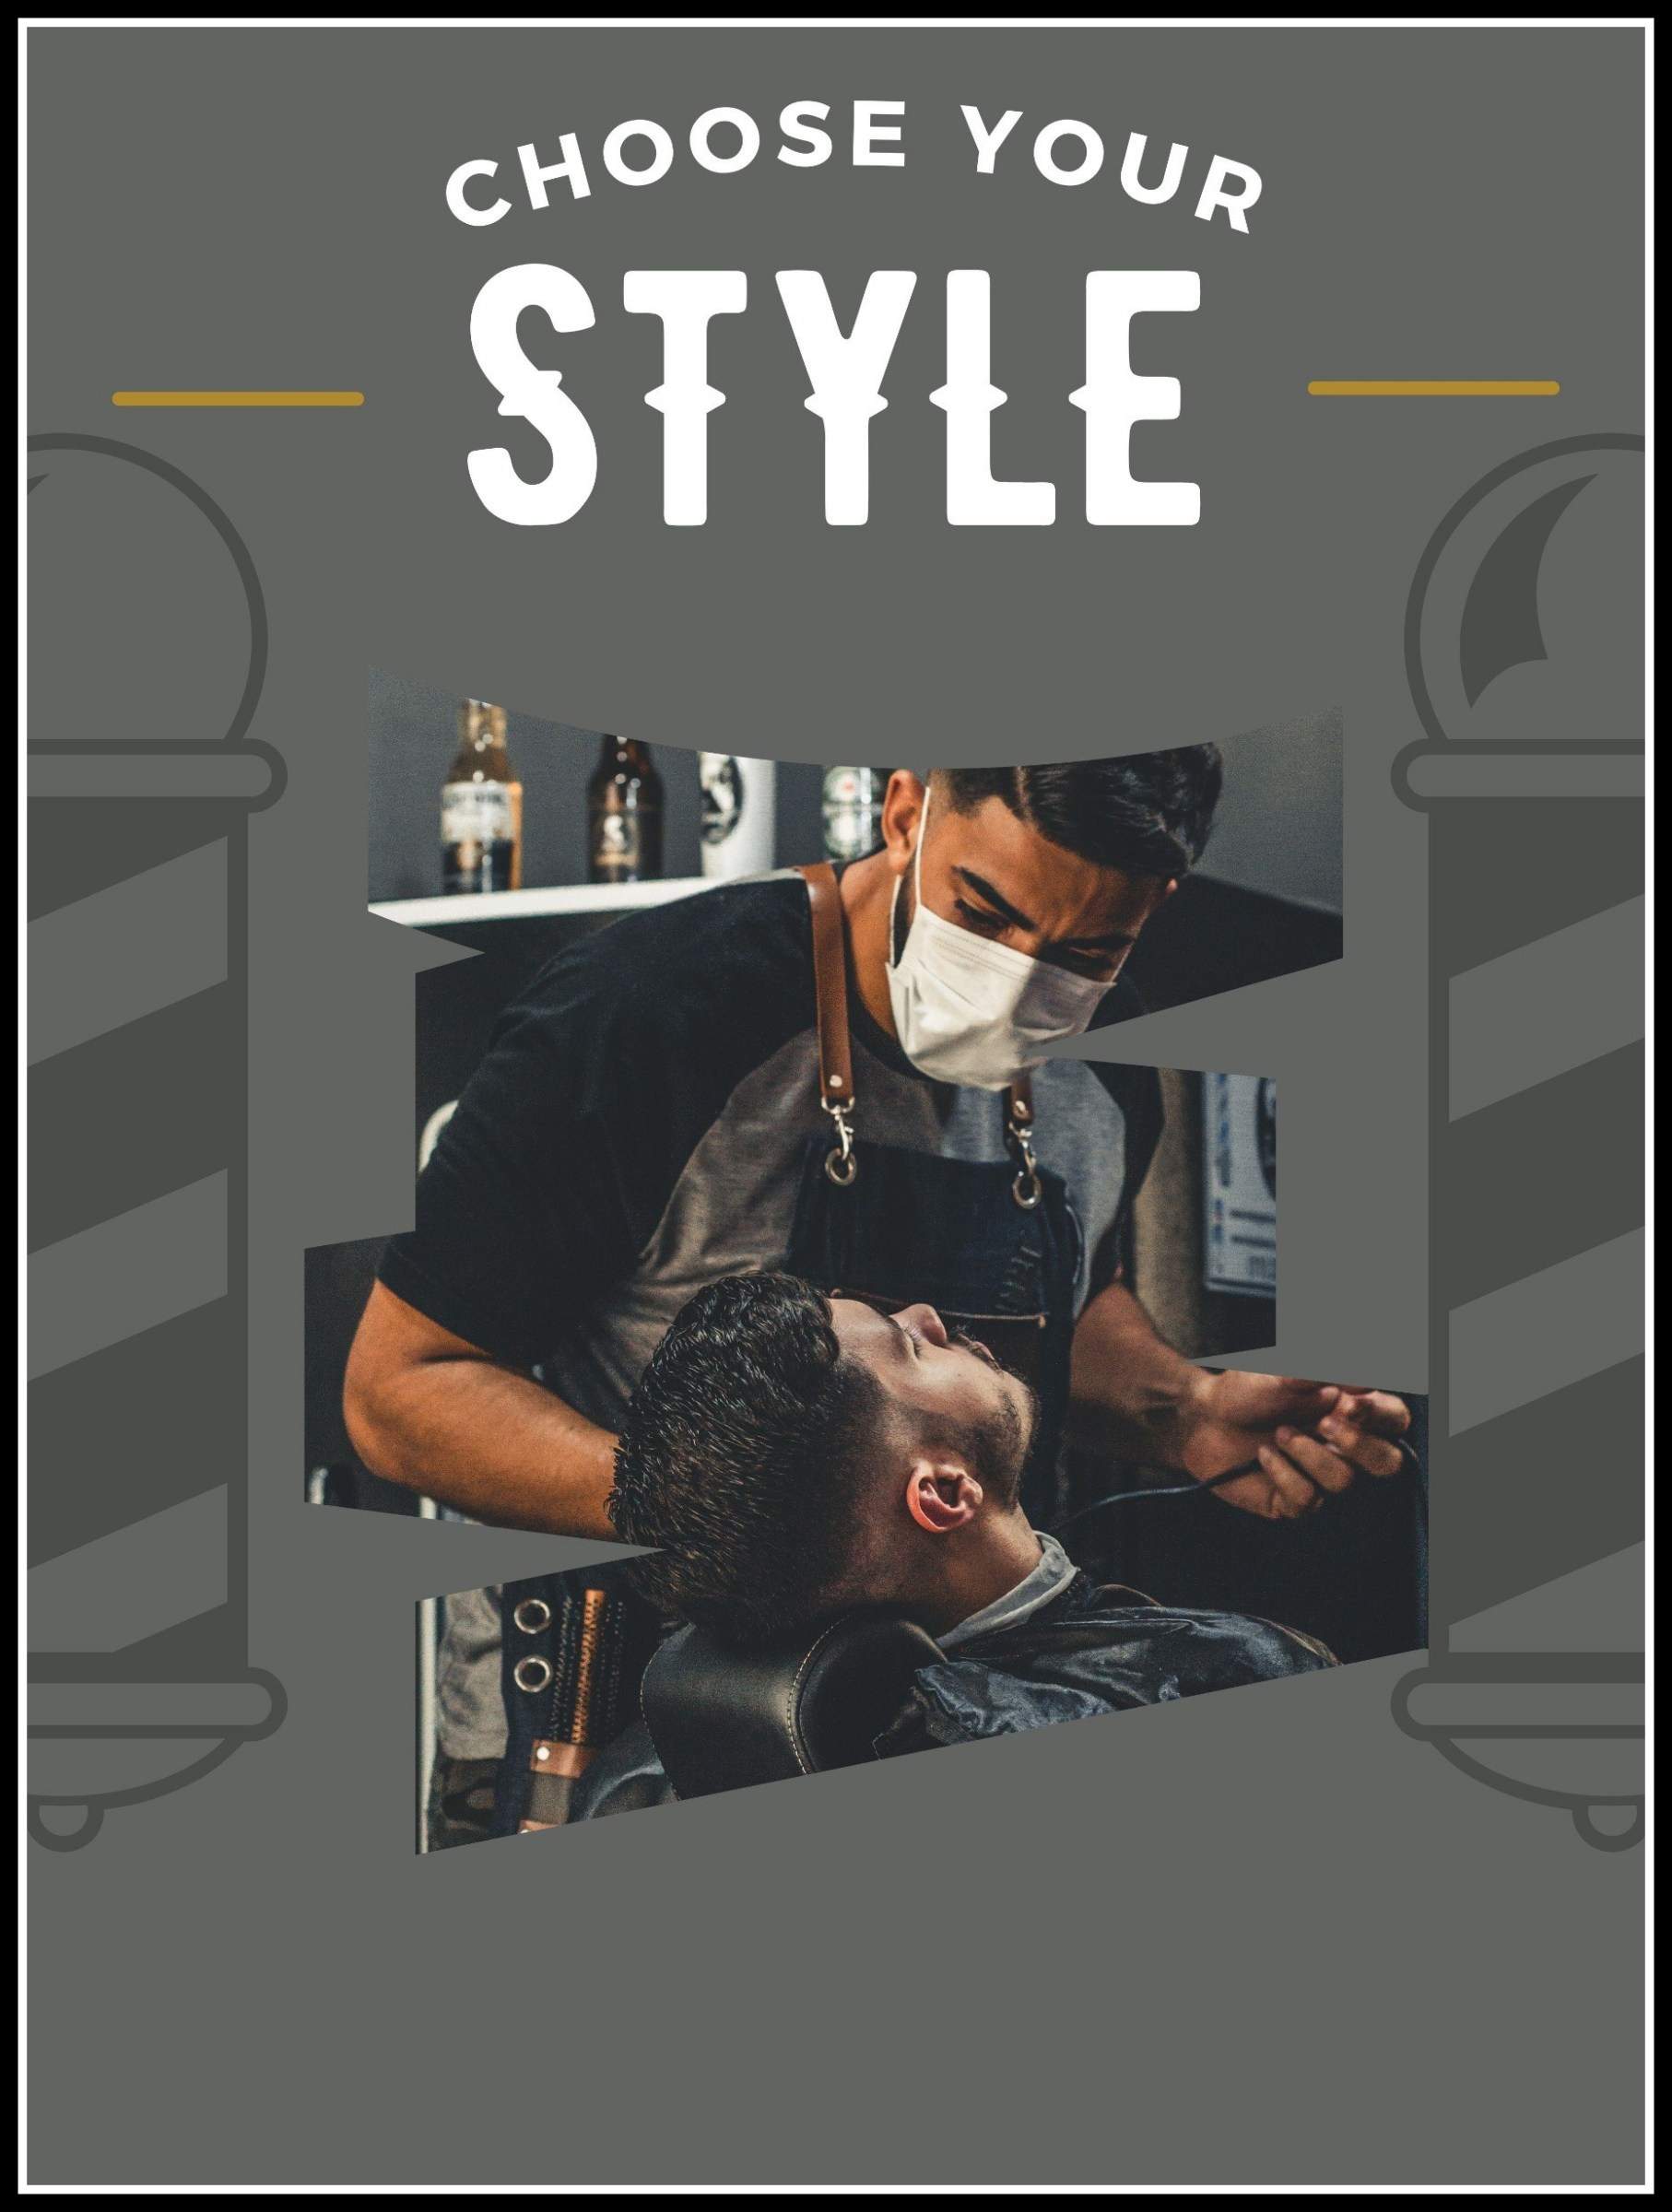 Barber Shop Choose Your Style Wall Decor Poster SMI67